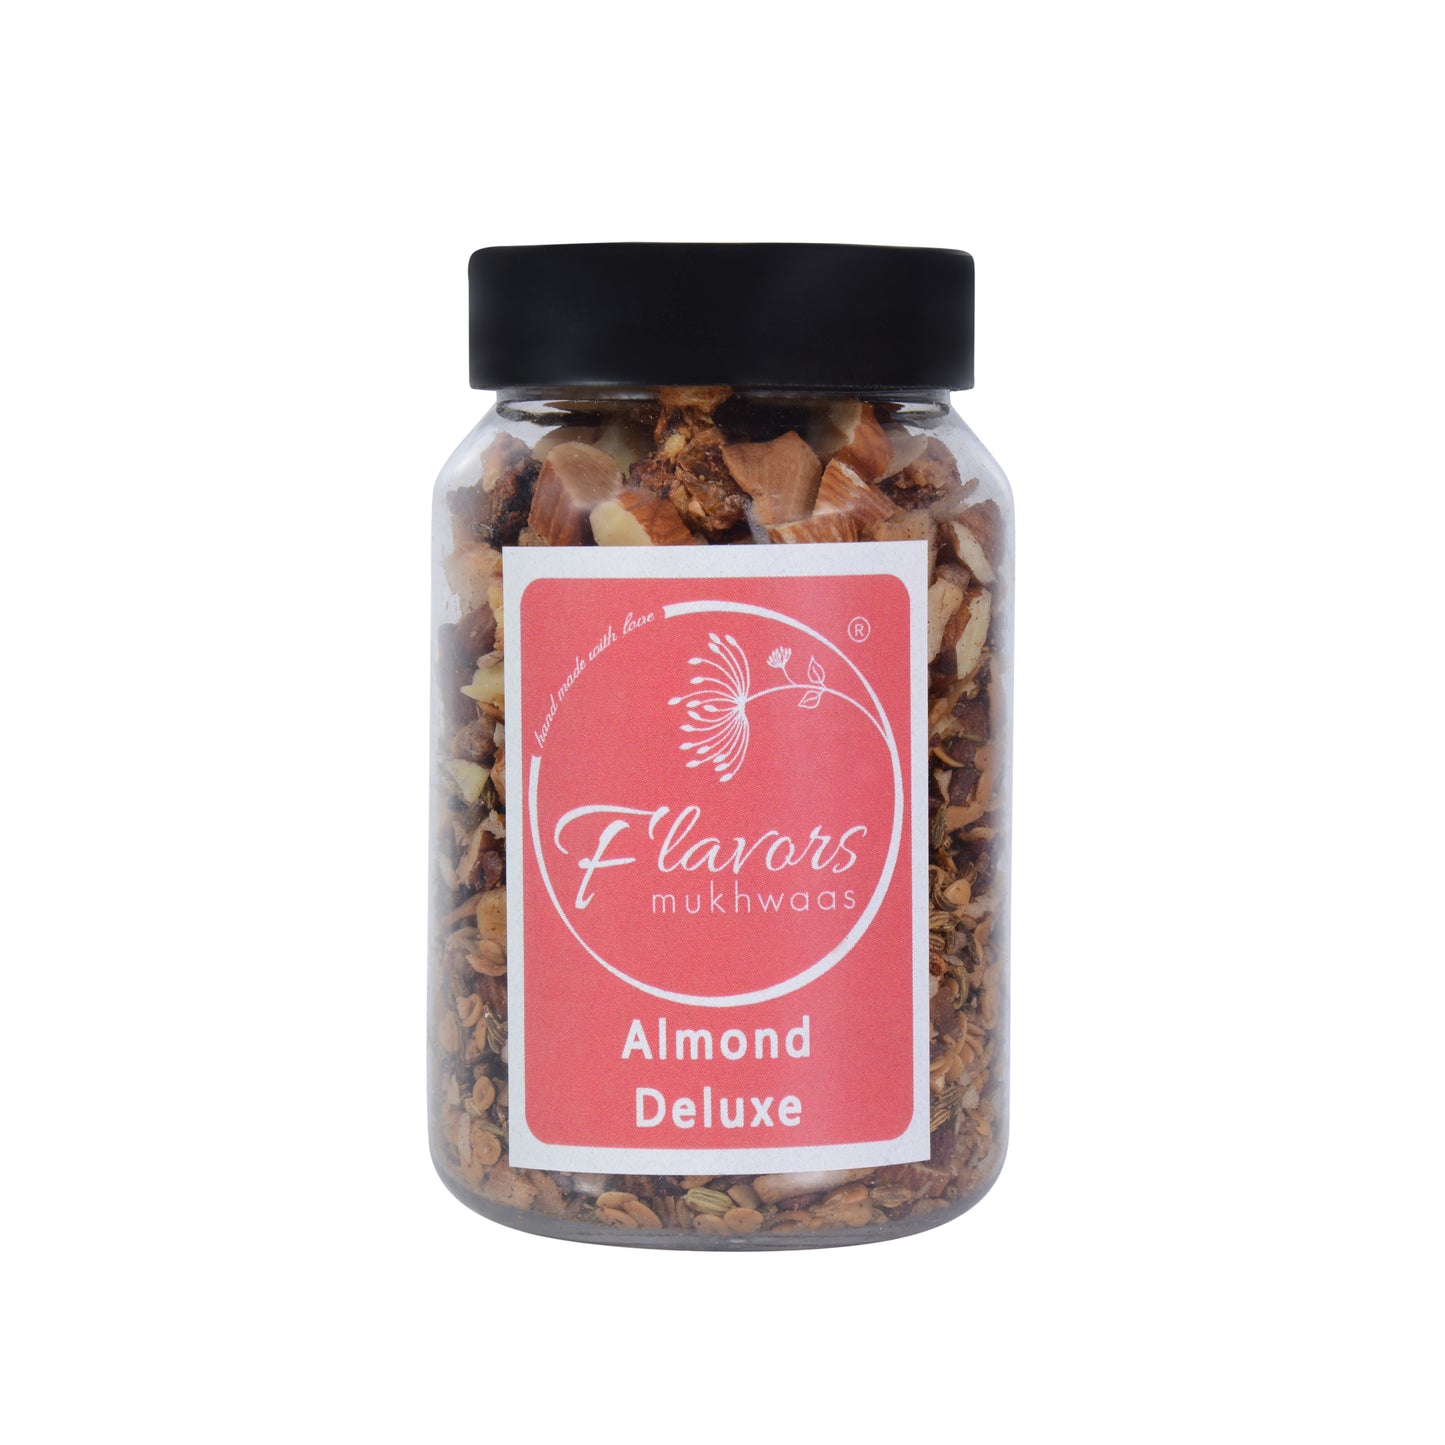 Almond Deluxe Mukhwas